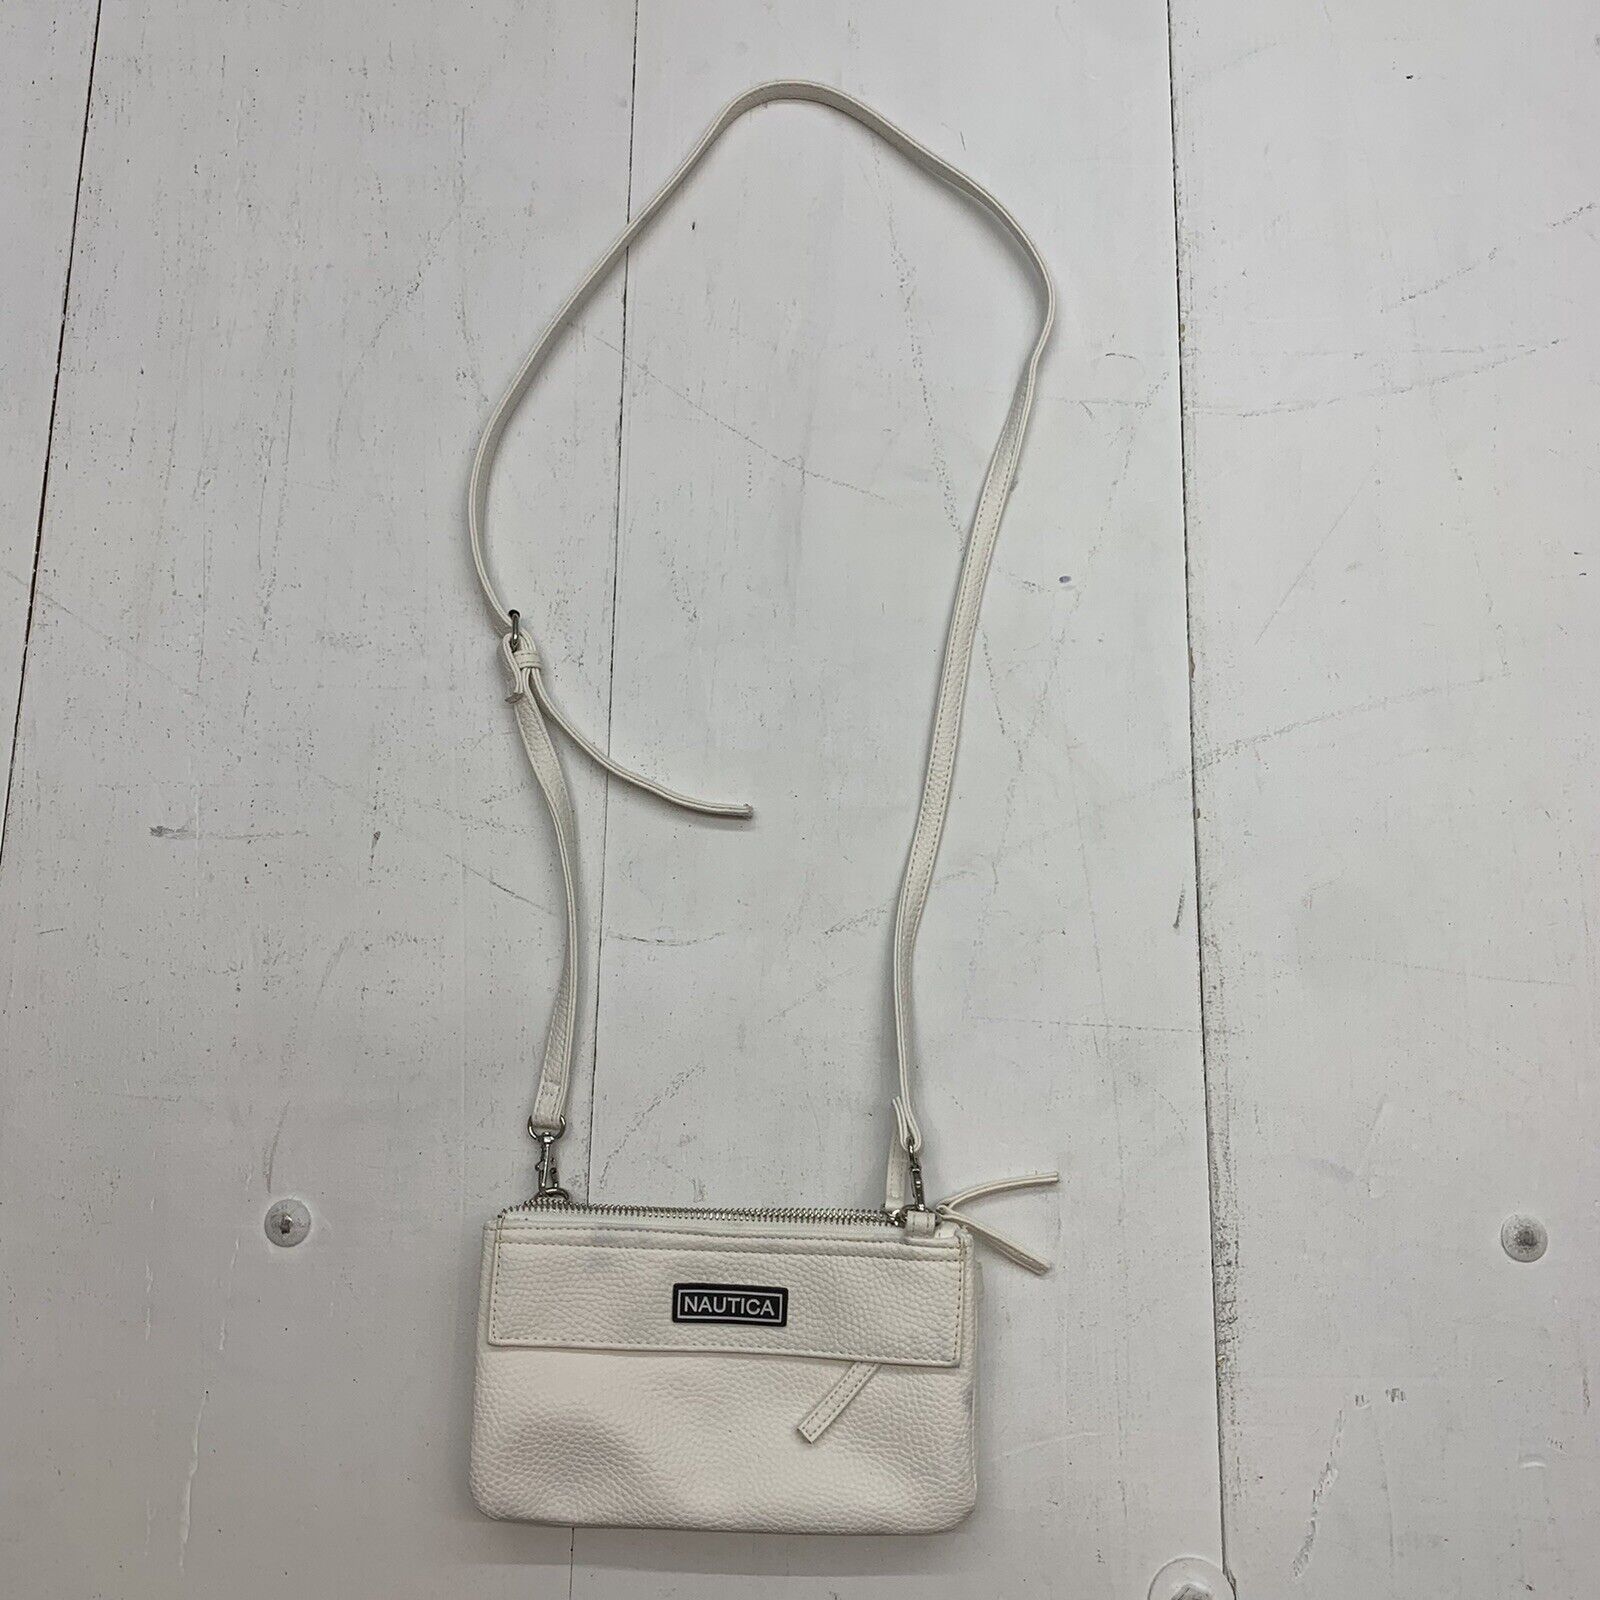 Nautica Womens White Leather Wallet and crossbody